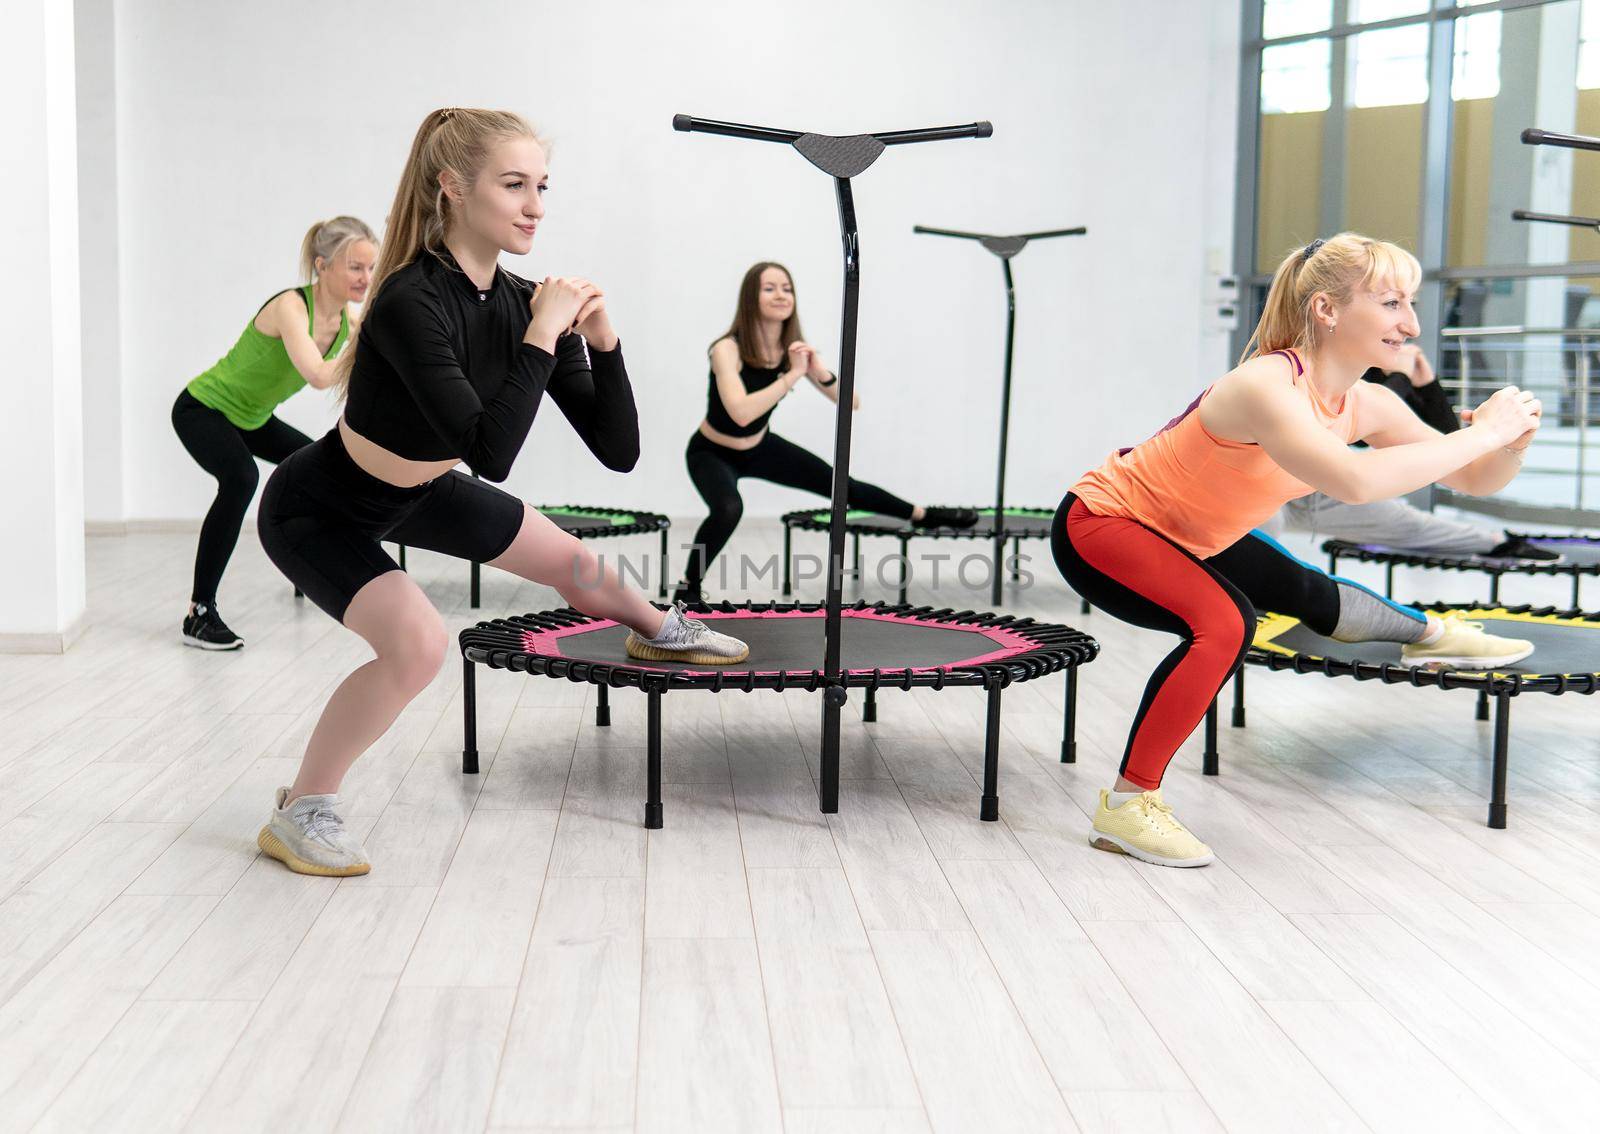 Trampoline for fitness girls are engaged in professional sports, the concept of a healthy lifestyle jumping trampoline woman fitness jump training, from workout active for activity from energy wellness, club vitality. Mini caucasian motion, dance by 89167702191